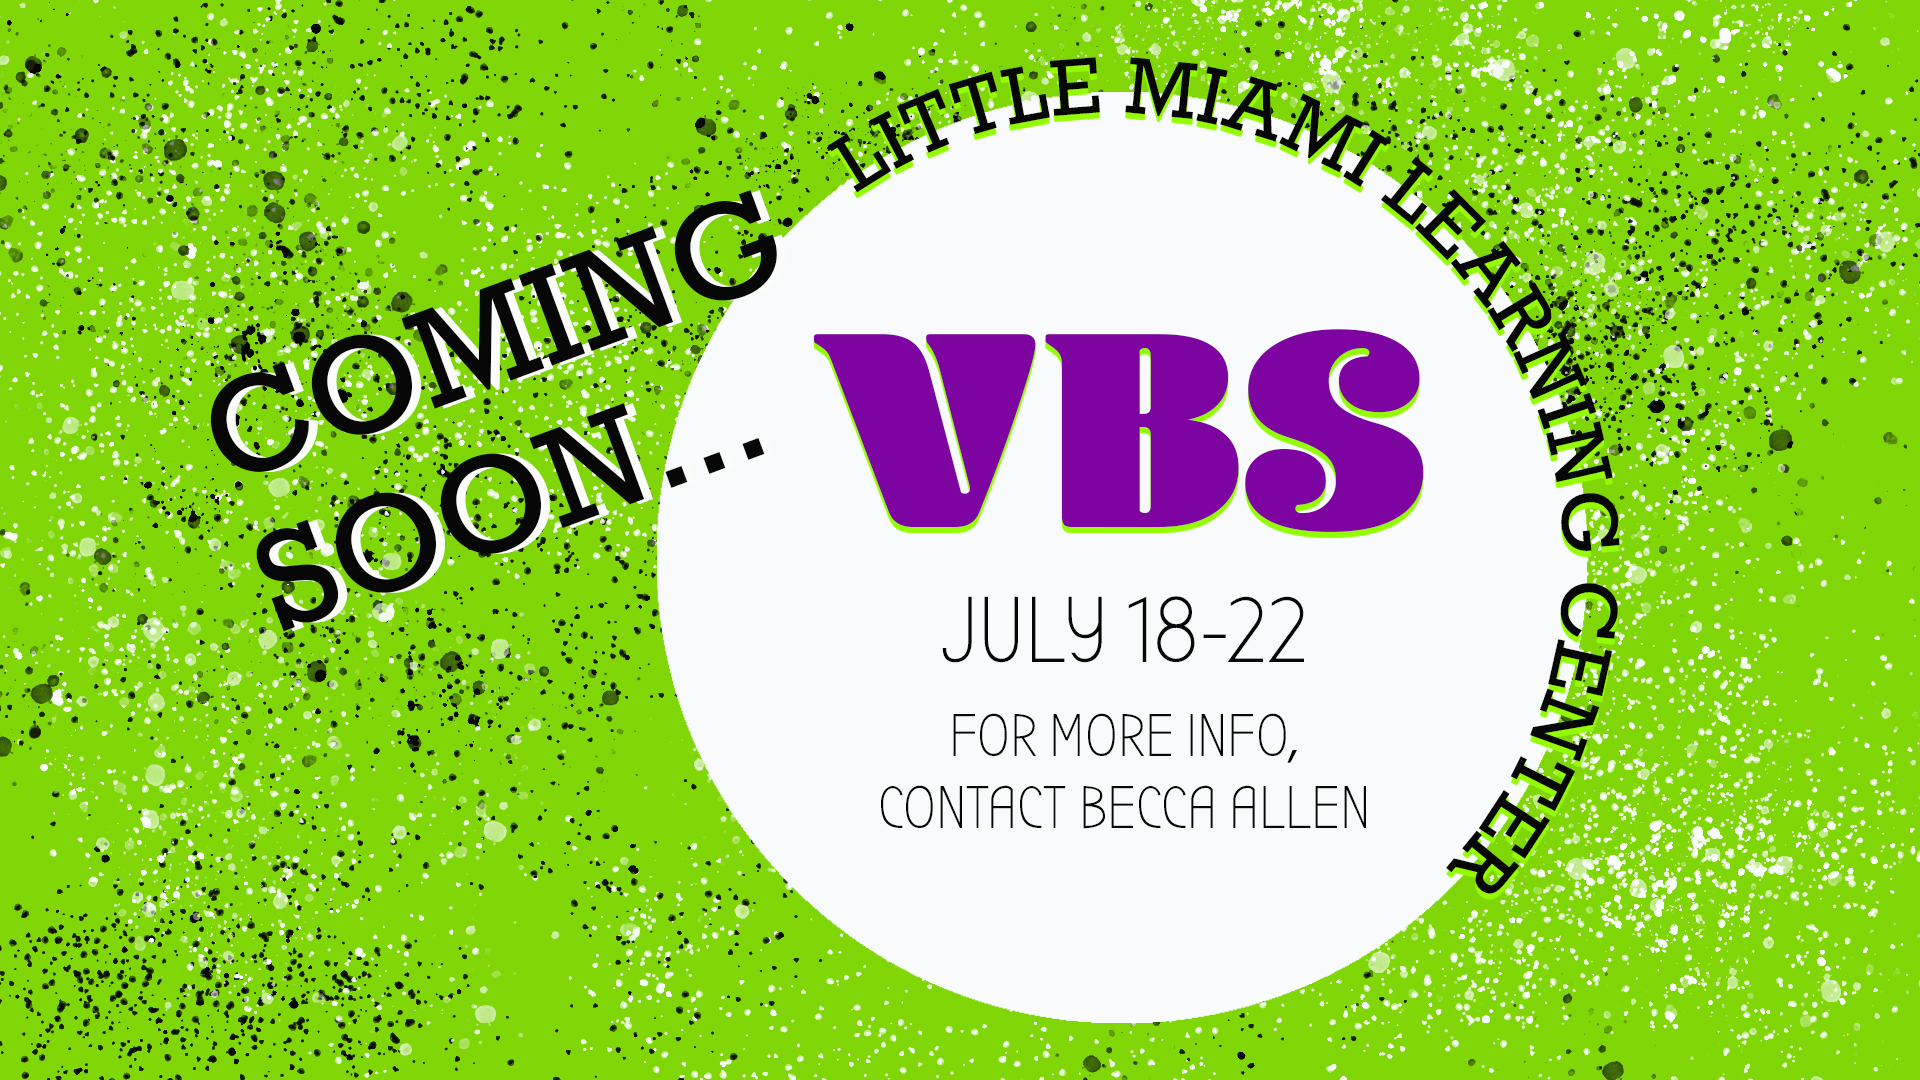 VBS Coming Soon image